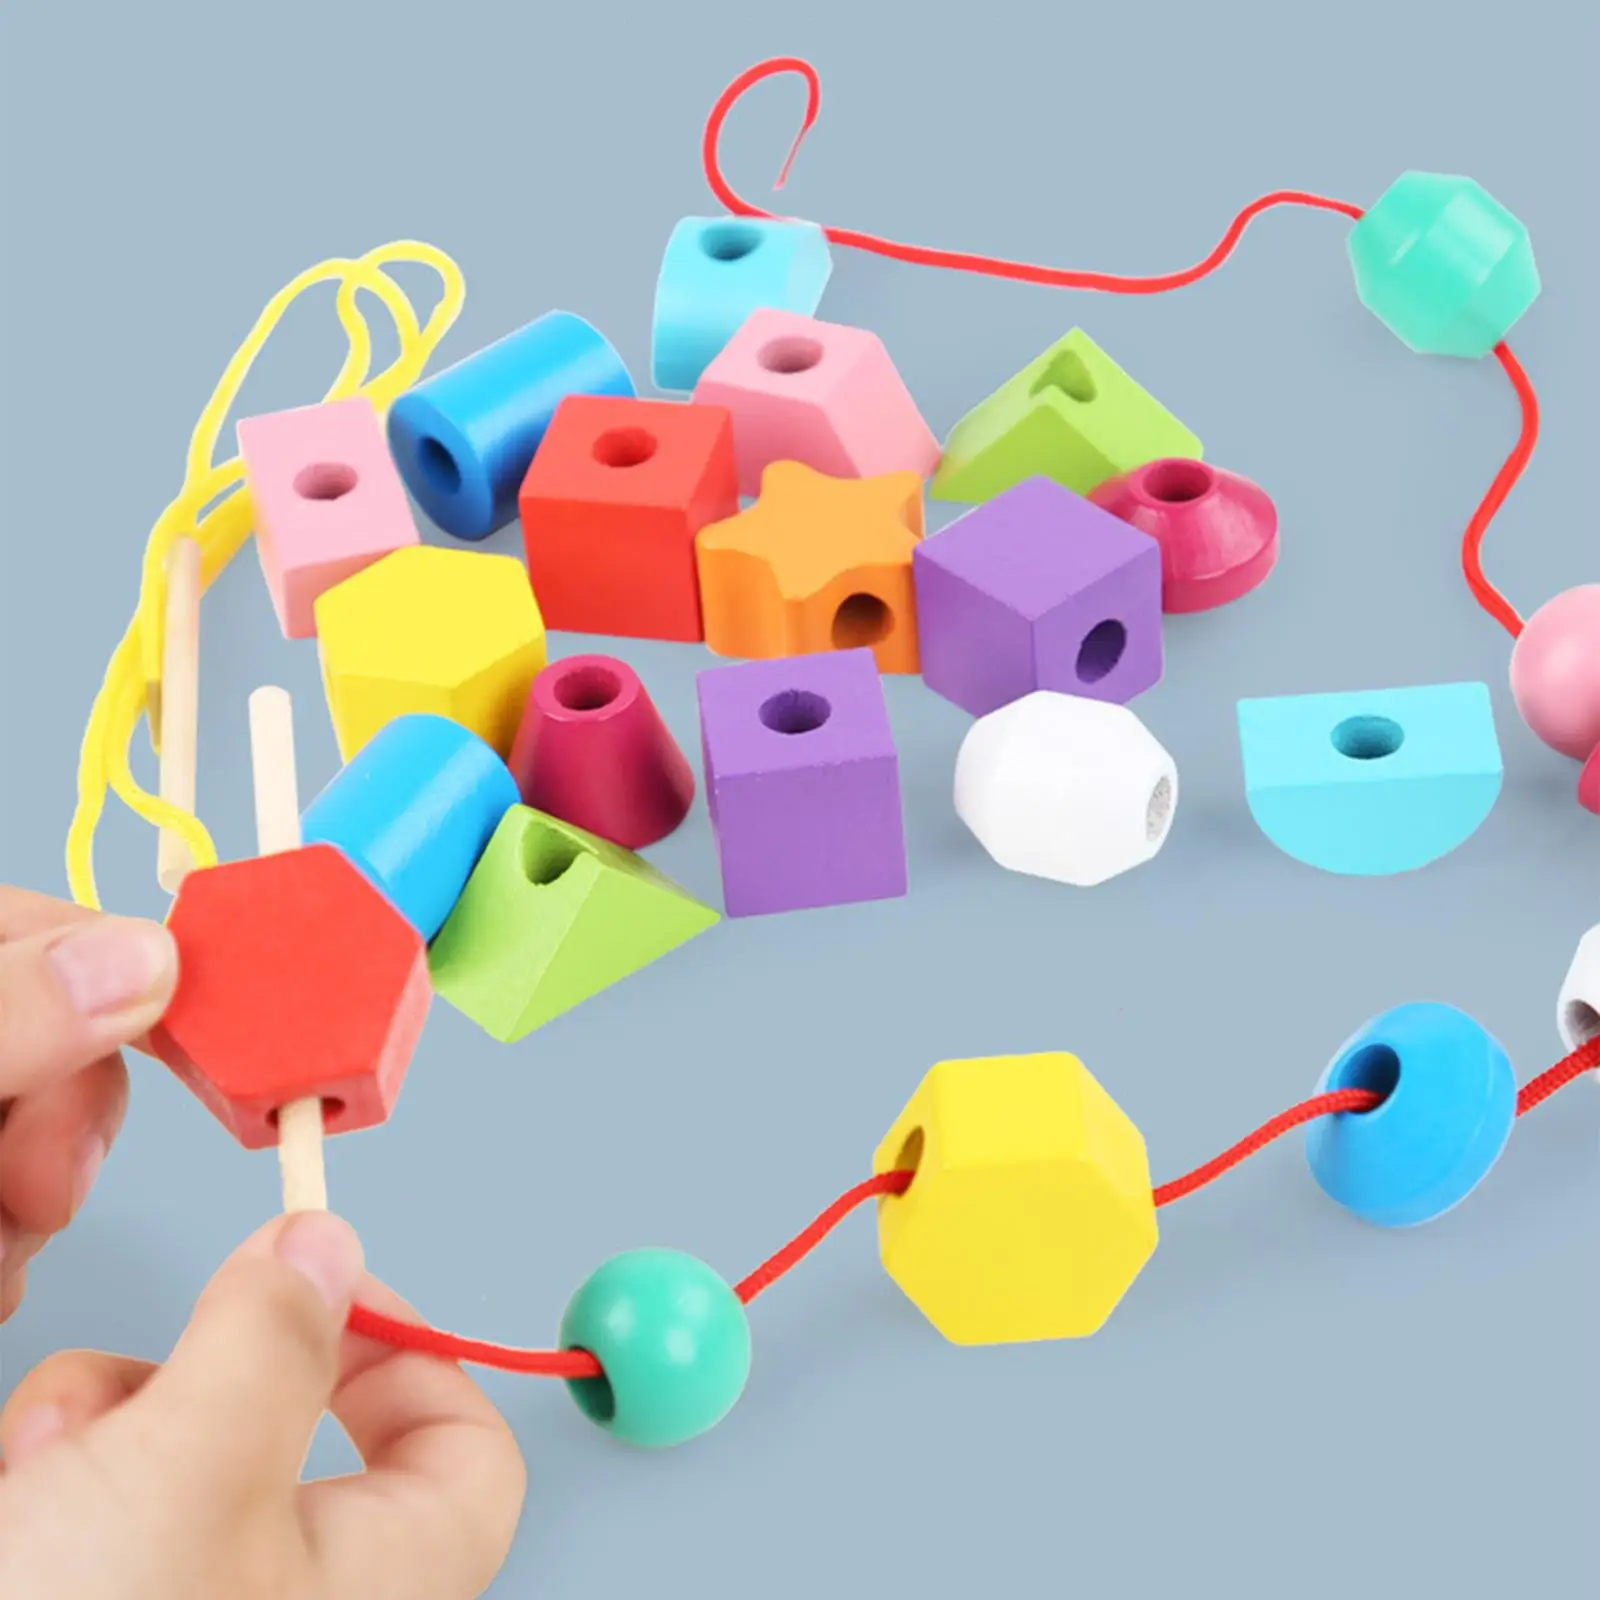 Set of Five Beaded Toys Sensory Toy Educational Monterssori Toy Colorful for Toddlers Birthday Gift Kids Children Preschool